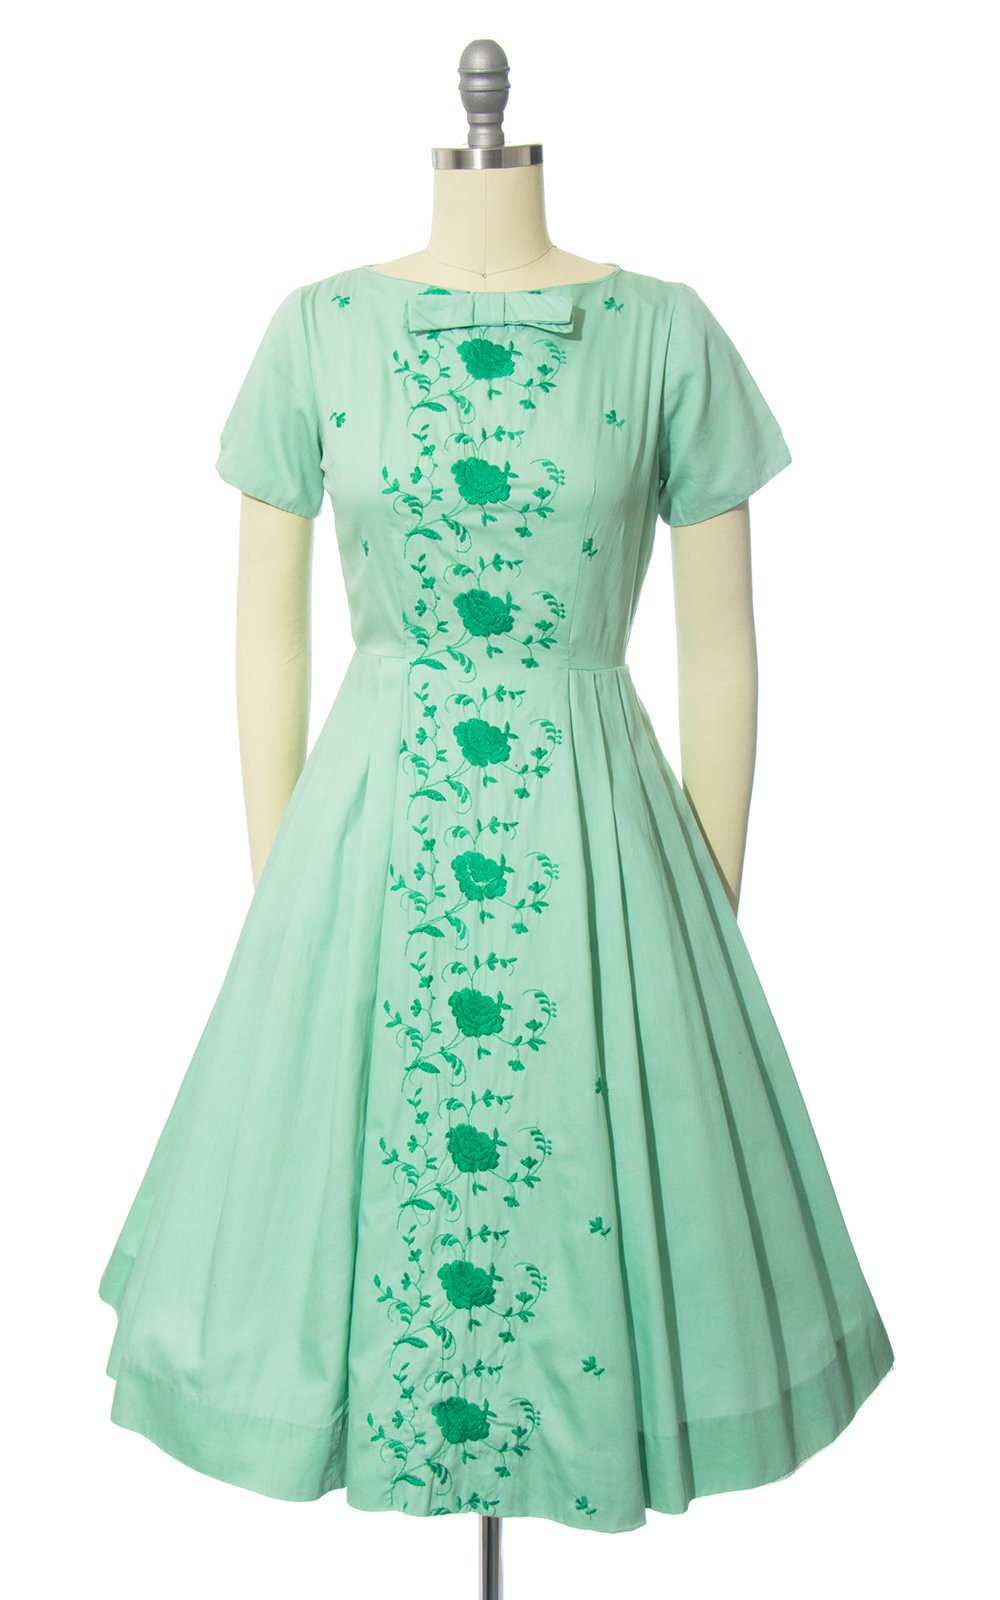 Vintage 1950s Dress | 50s Rose Floral Embroidered Mint Green Cotton Full Skirt Day Dress (xs/small)